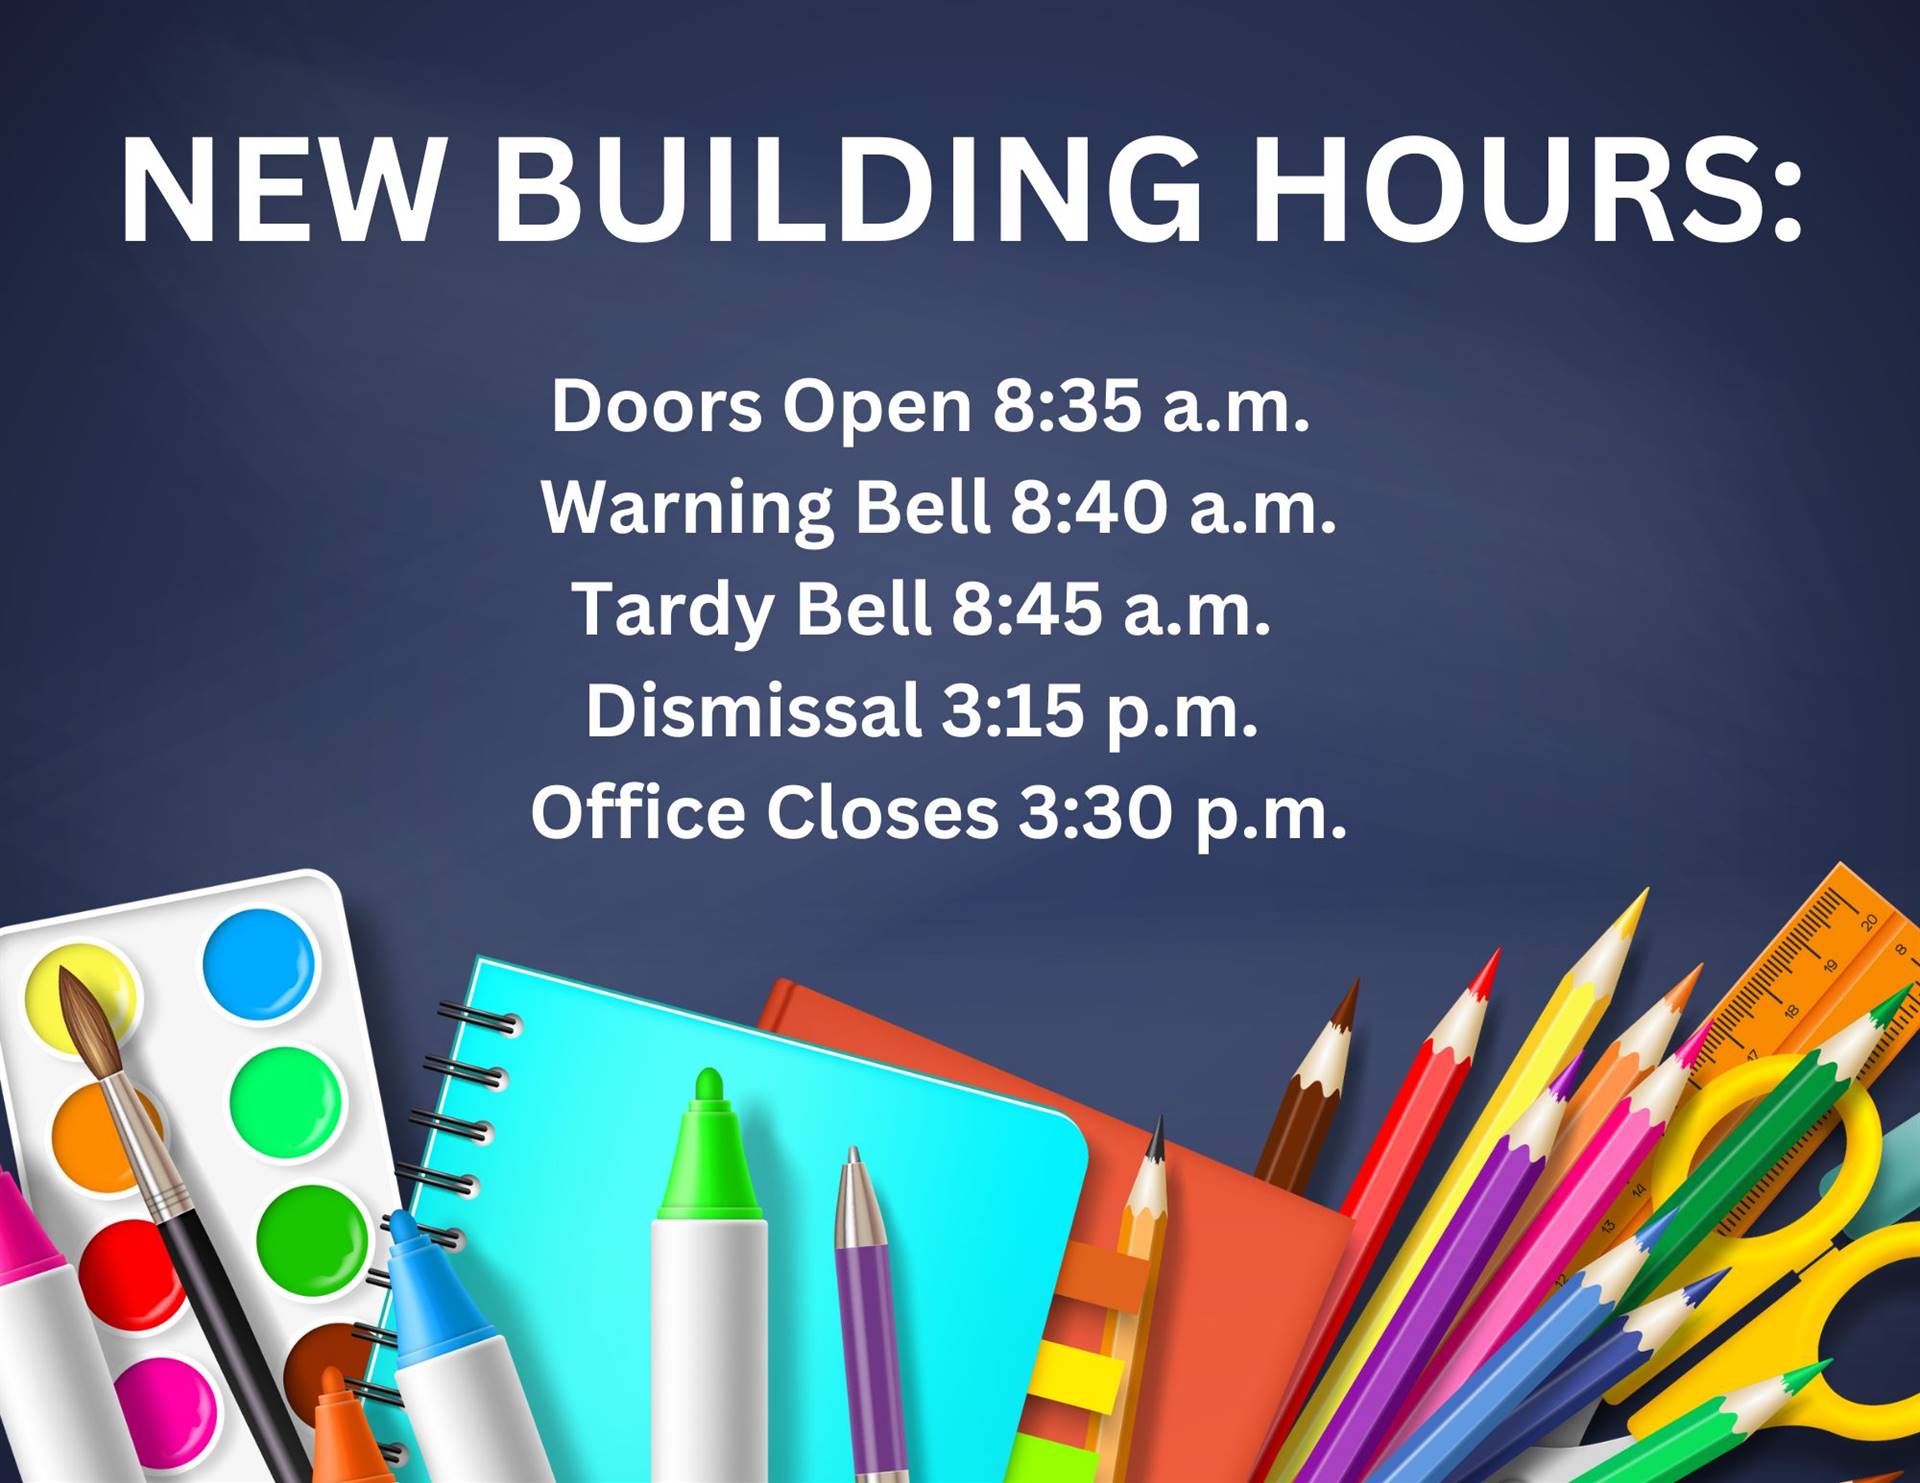 New Building Hours- start is 8:45 and dismissal is 3:15